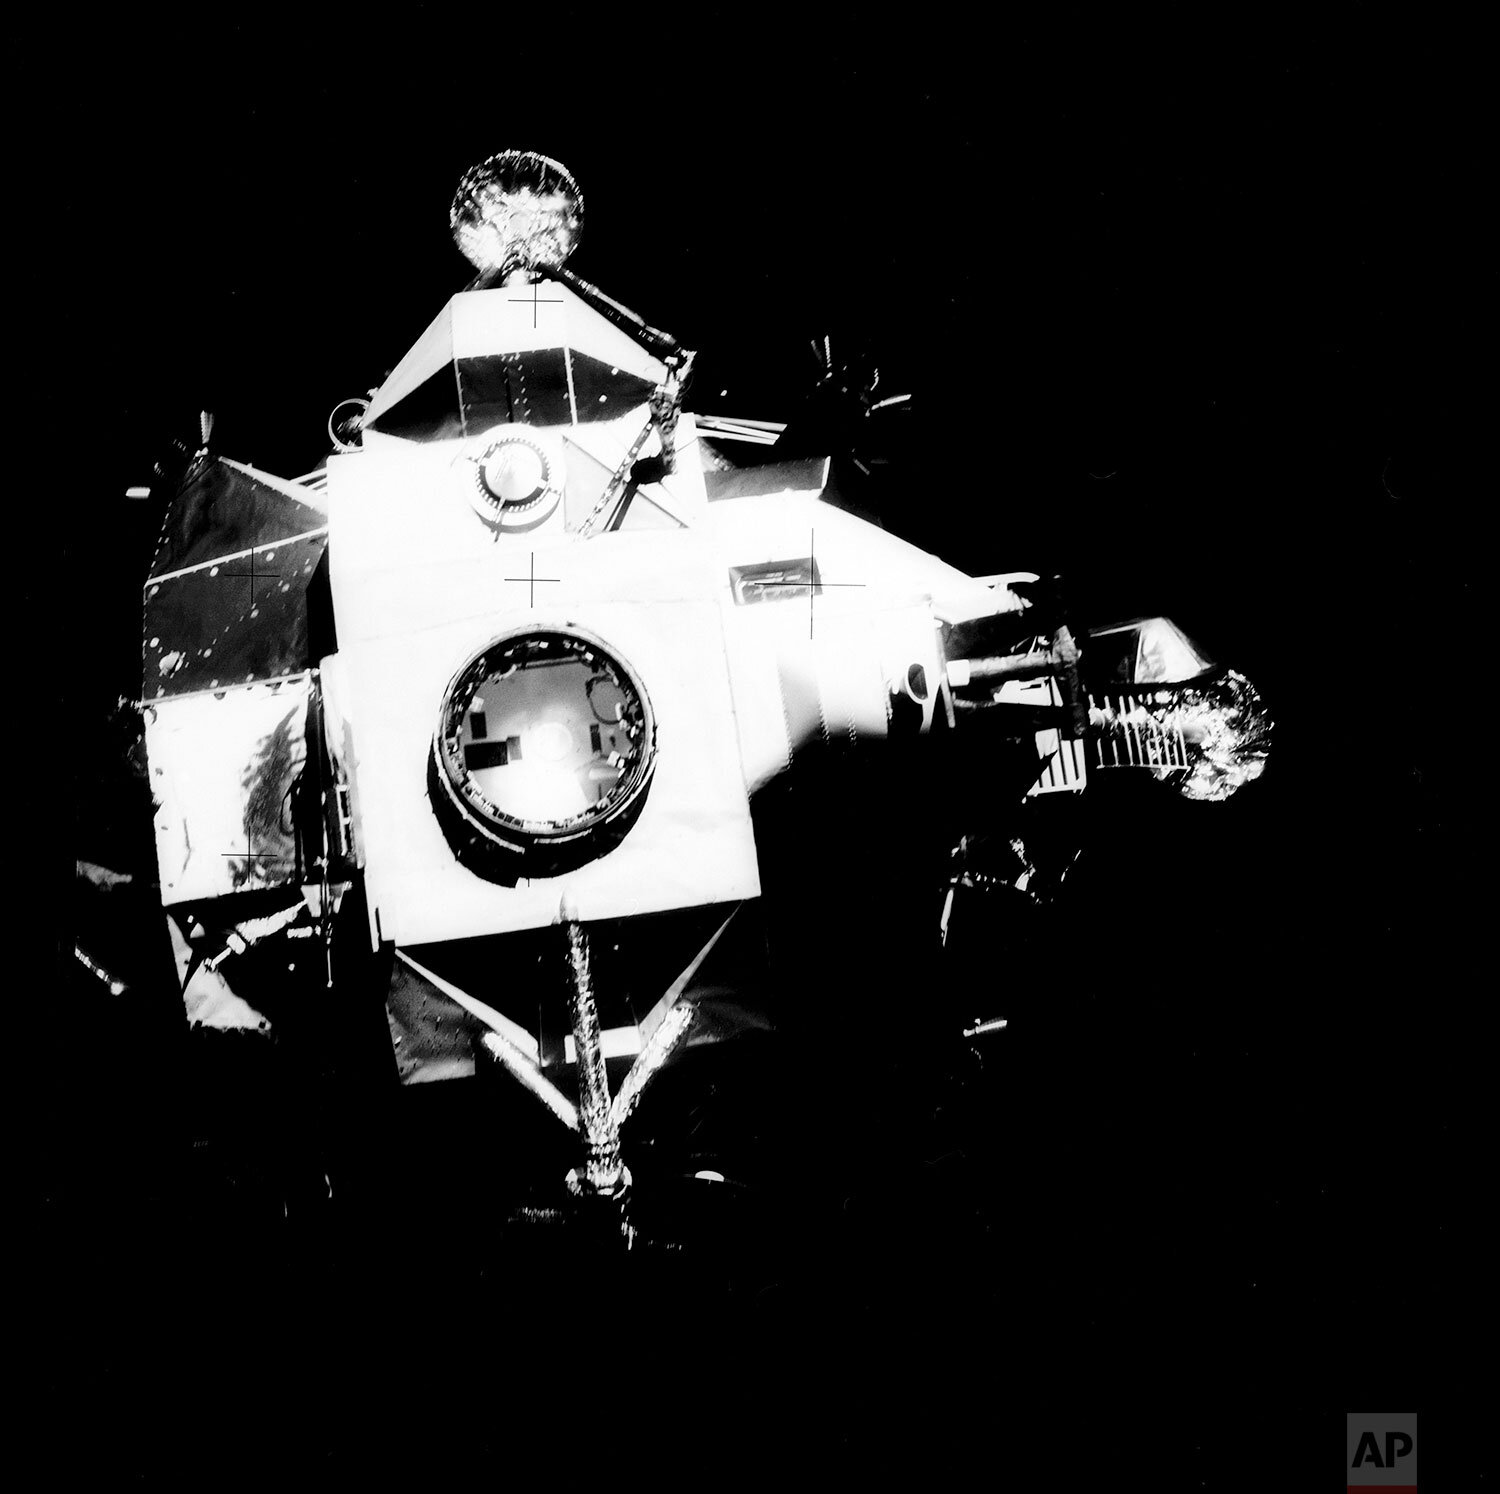  A view of the Apollo 13 Lunar Module (LM) was photographed from the Command Module (CM) just after the LM had been jettisoned, April 17, 1970. The jettisoning occurred a few minutes before 11 a.m. (CST), just over an hour prior to splashdown of the 